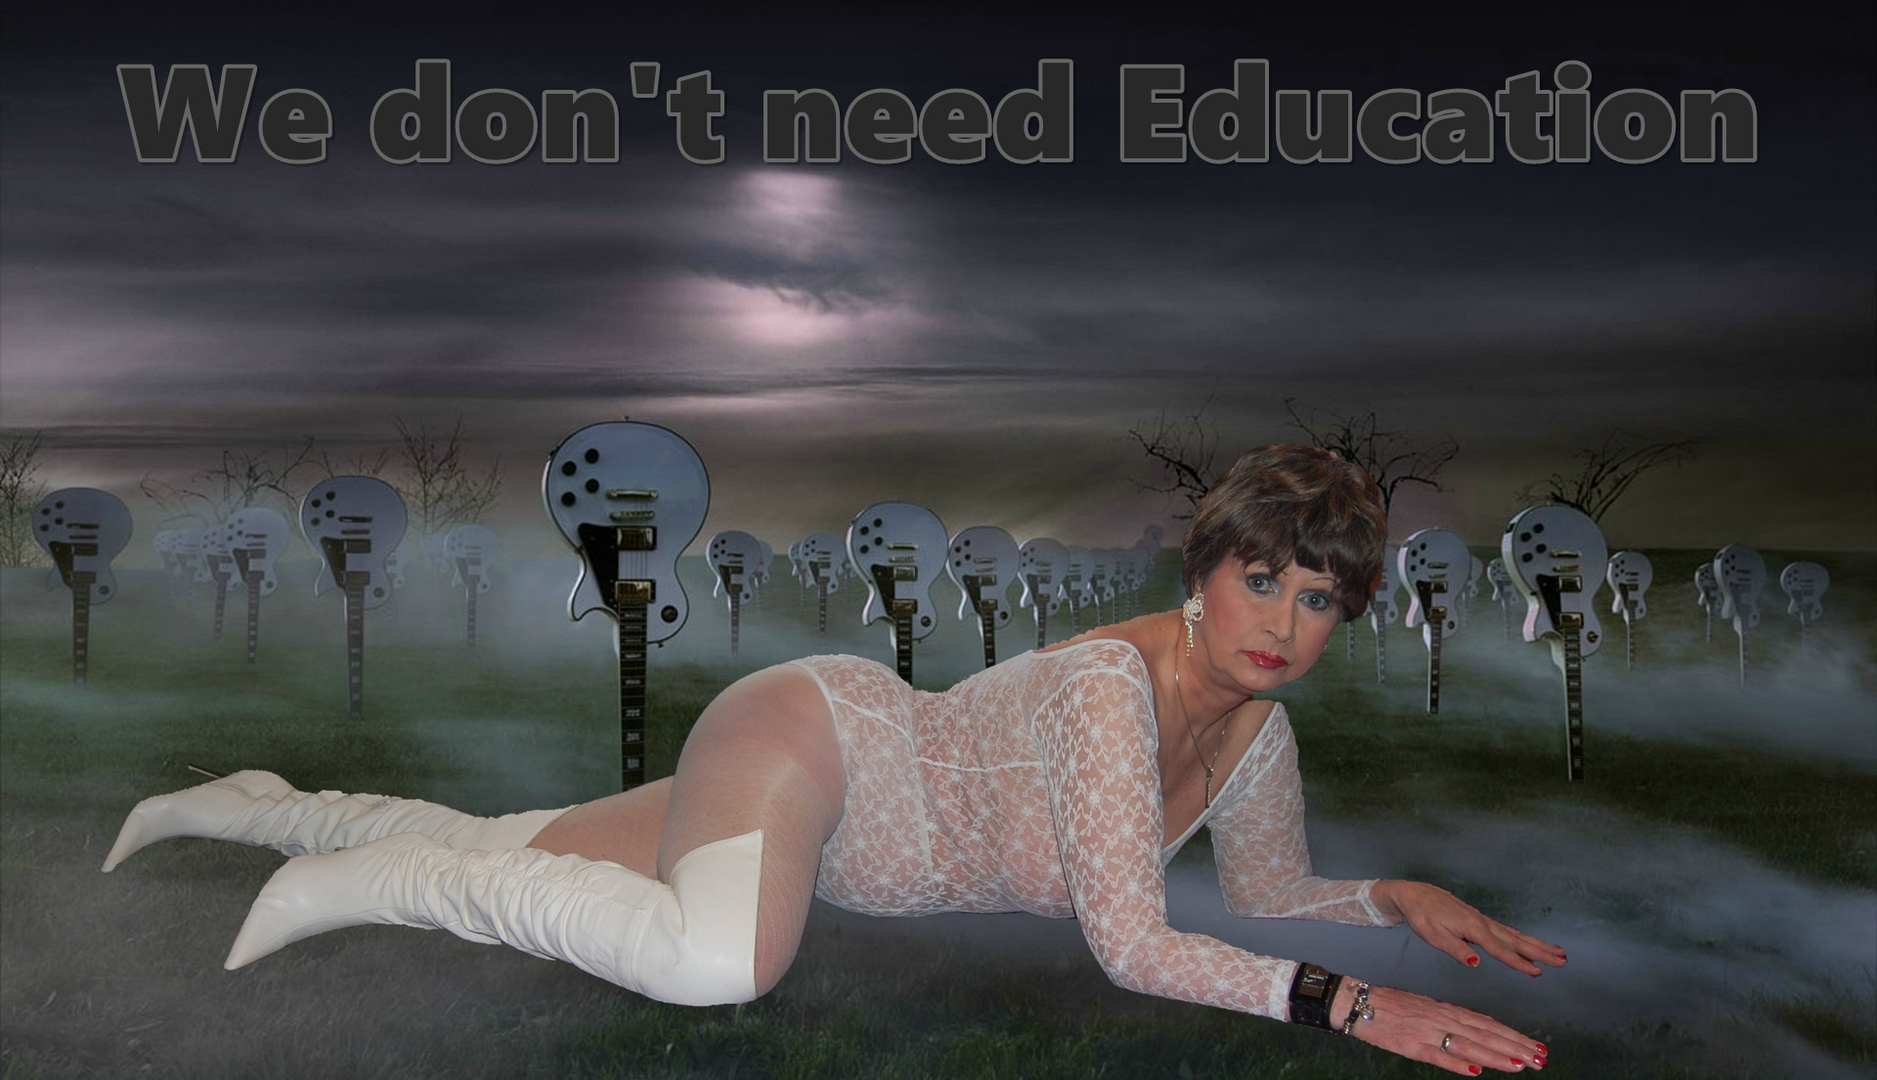 We don't need Education